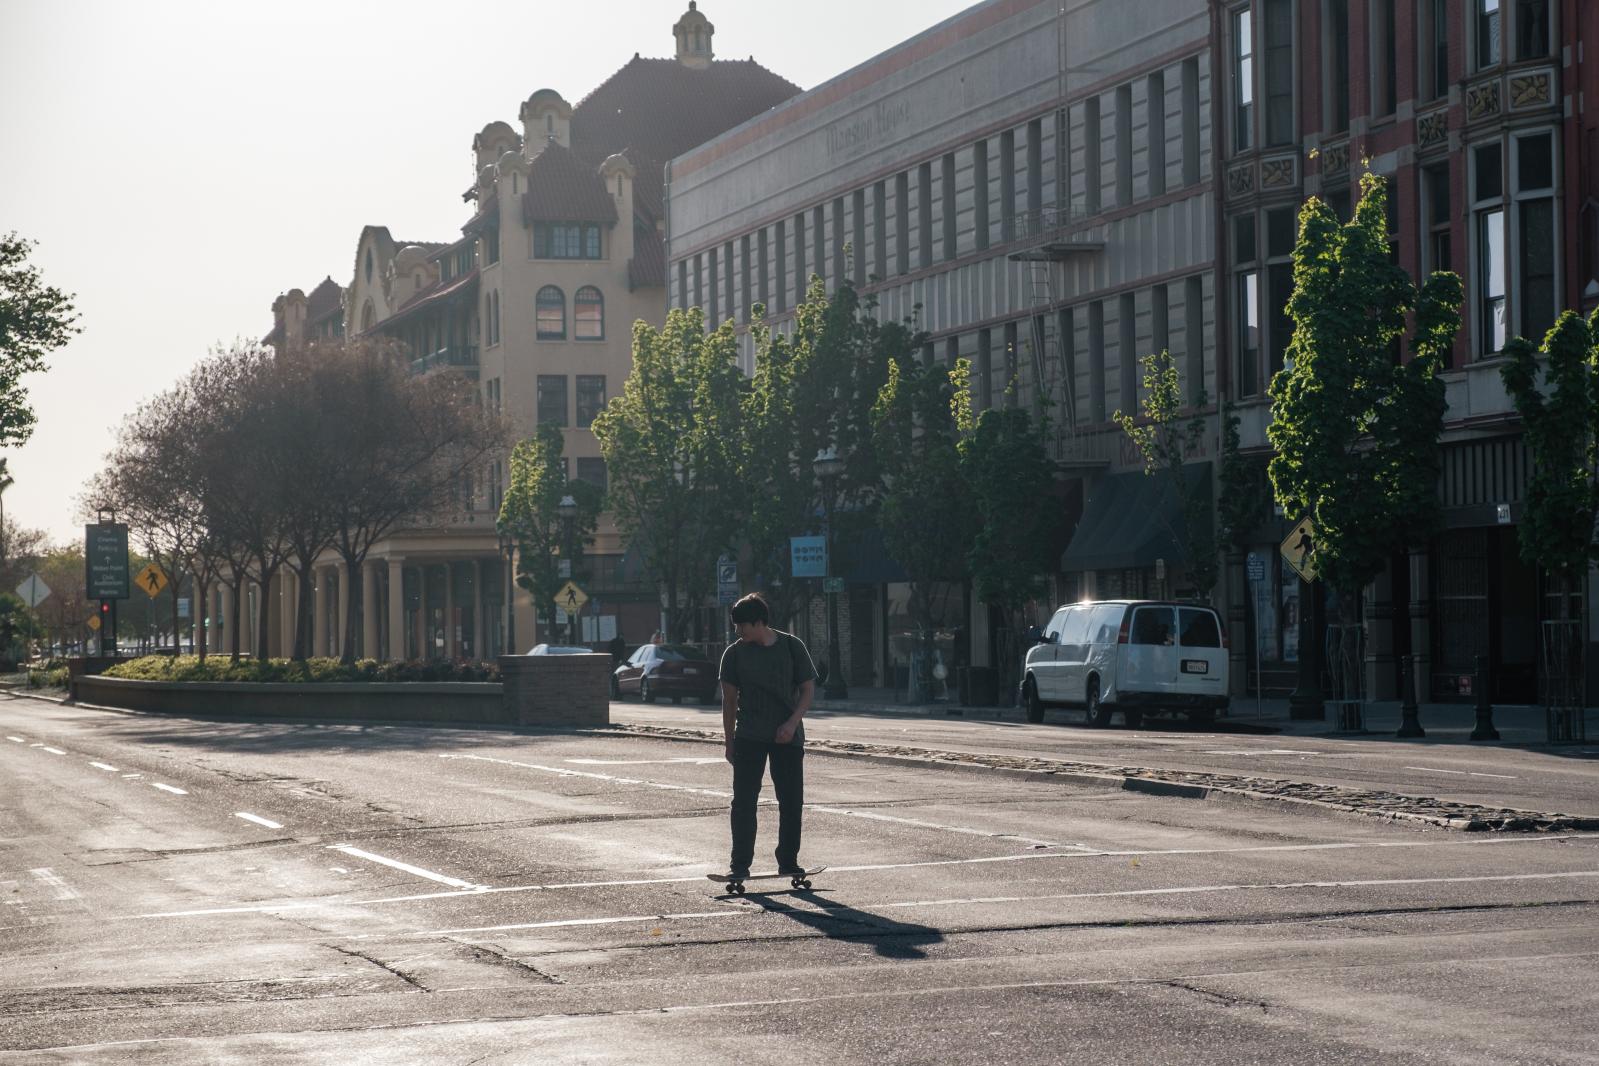 Image from Universal Basic Income: Trying to save a city - STOCKTON, CA - APRIL 5: A skateboarder is seen riding...